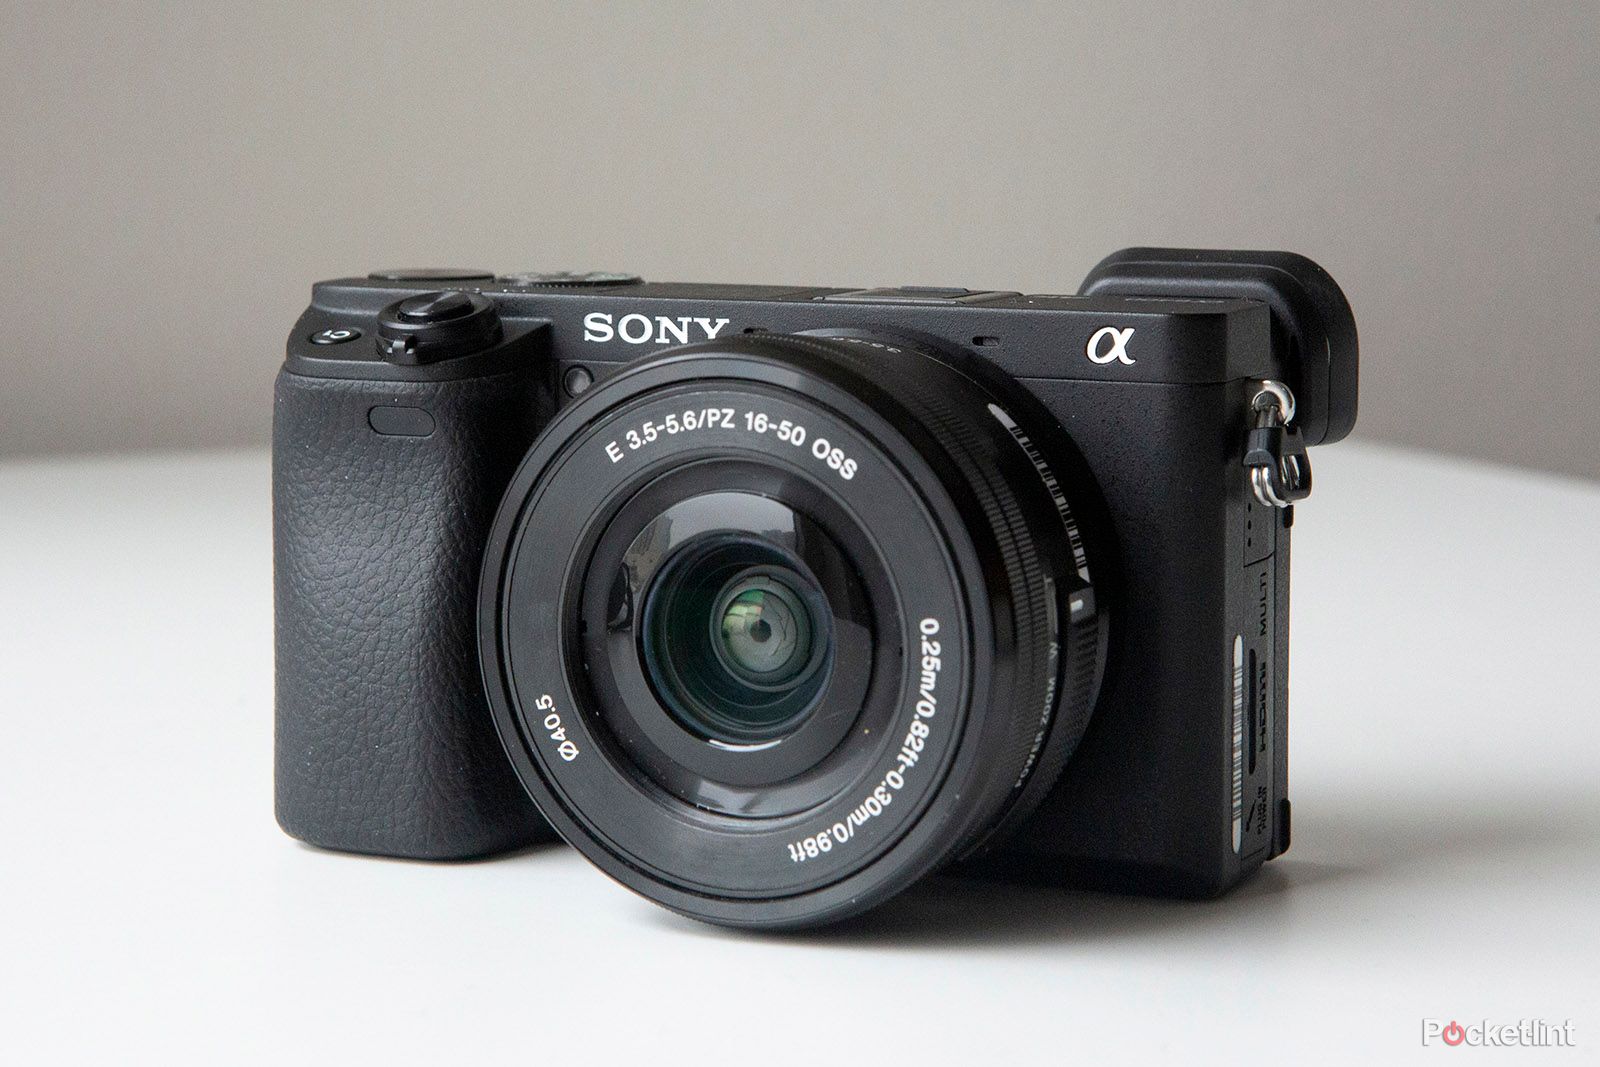 Sony a6400 Review 